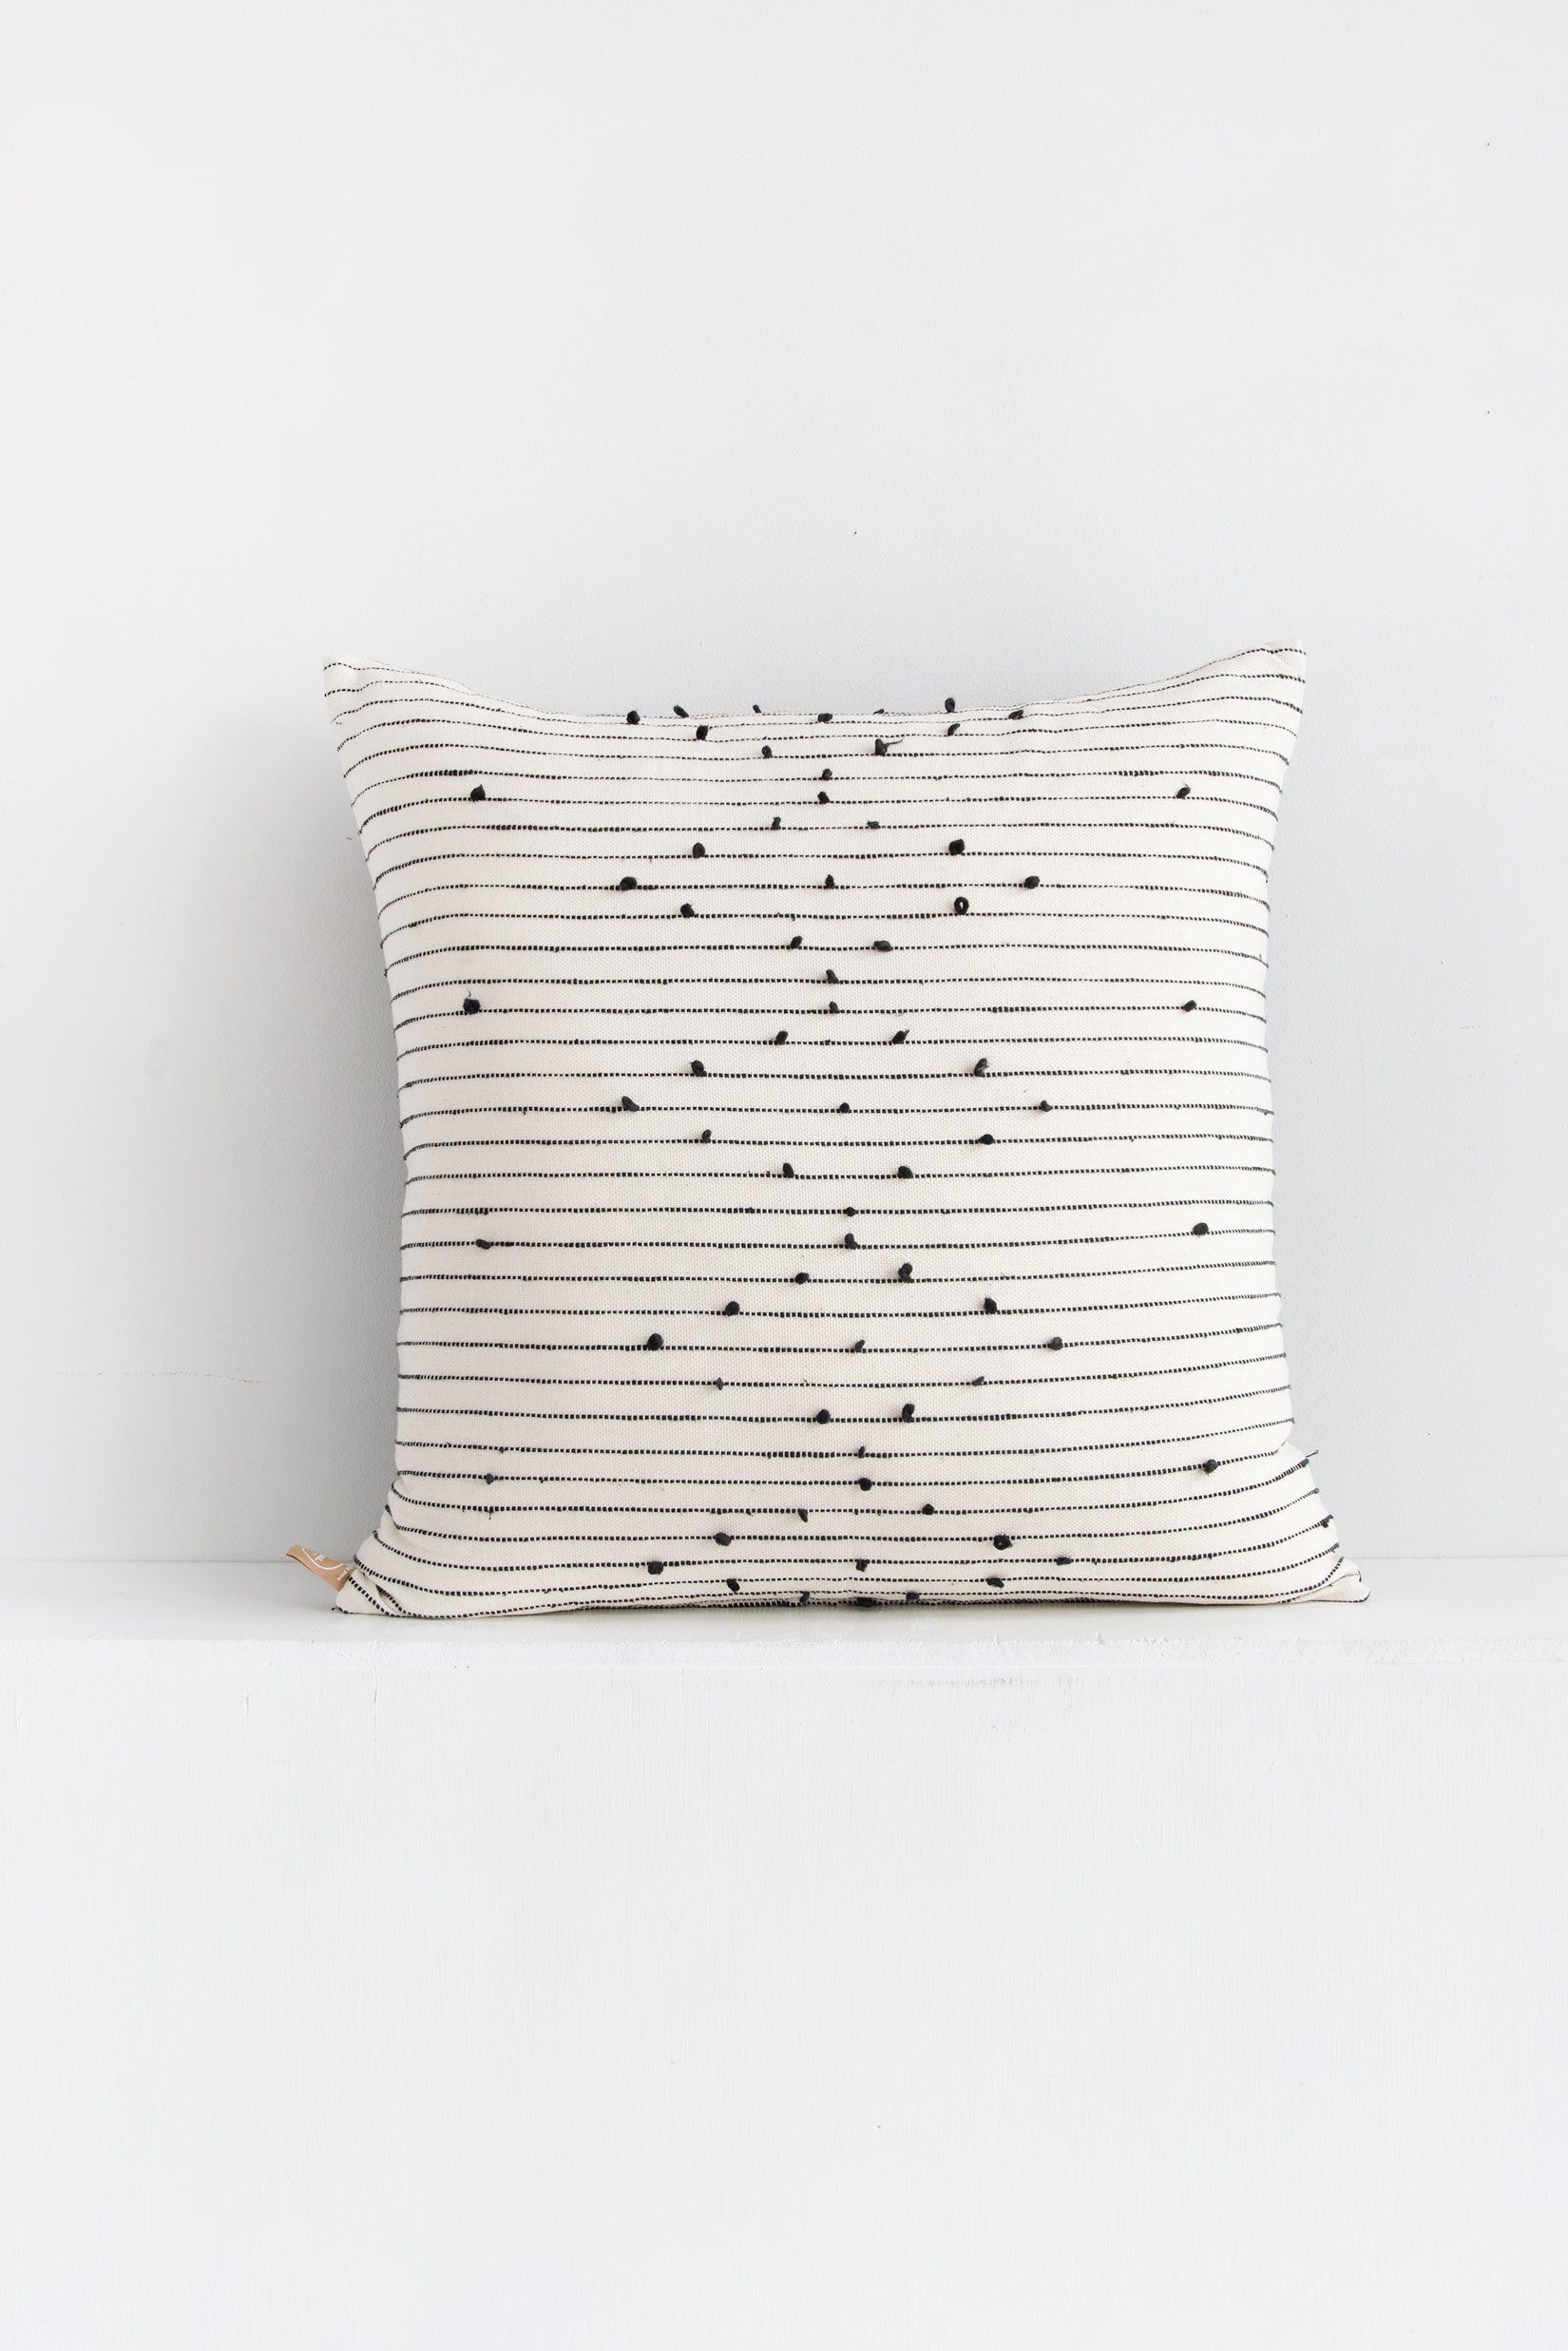 Large square white woven throw pillow with small black pom pom accents arranged in a repeating diamond pattern arranged along black lines stretching across the pillow.